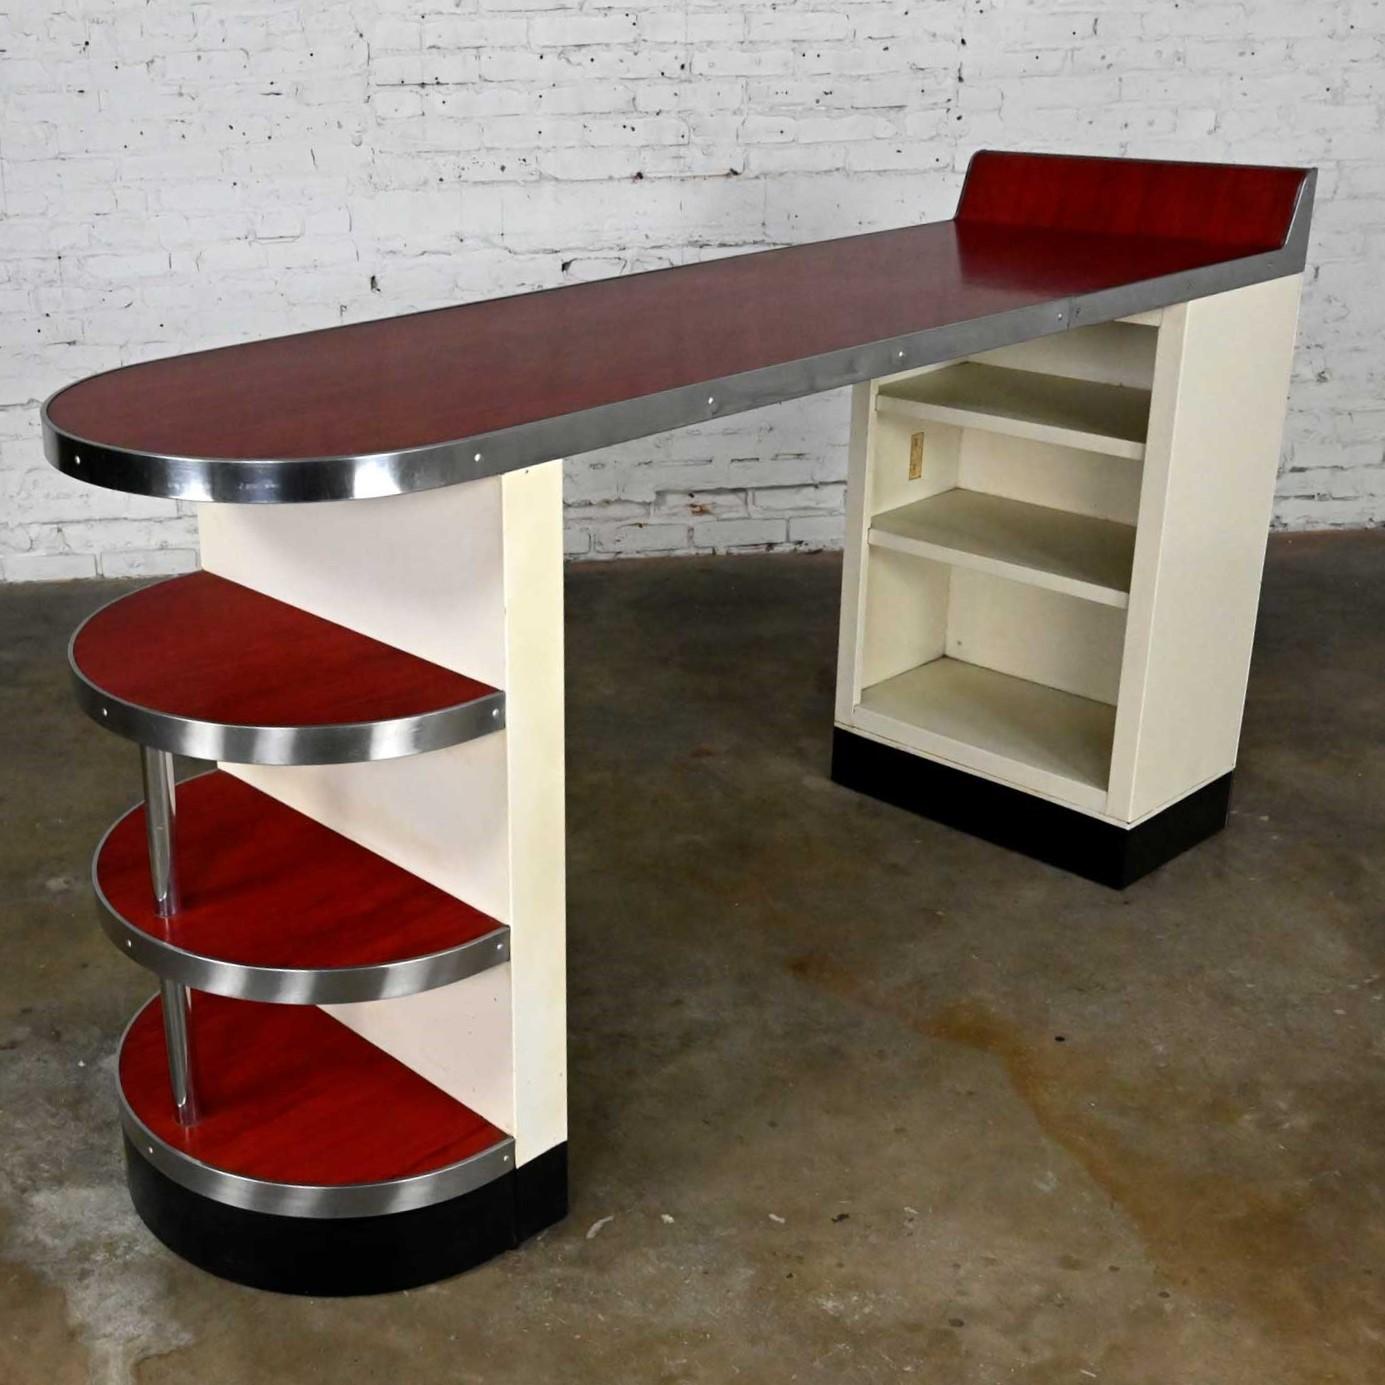 Wonderful vintage Mid-Century Modern American Kitchens brunch bar metal kitchen peninsula by AVCO Corporation. Comprised of a white metal base, red vinyl plastic bonded to steel countertops, and chrome trim. Beautiful condition, keeping in mind that